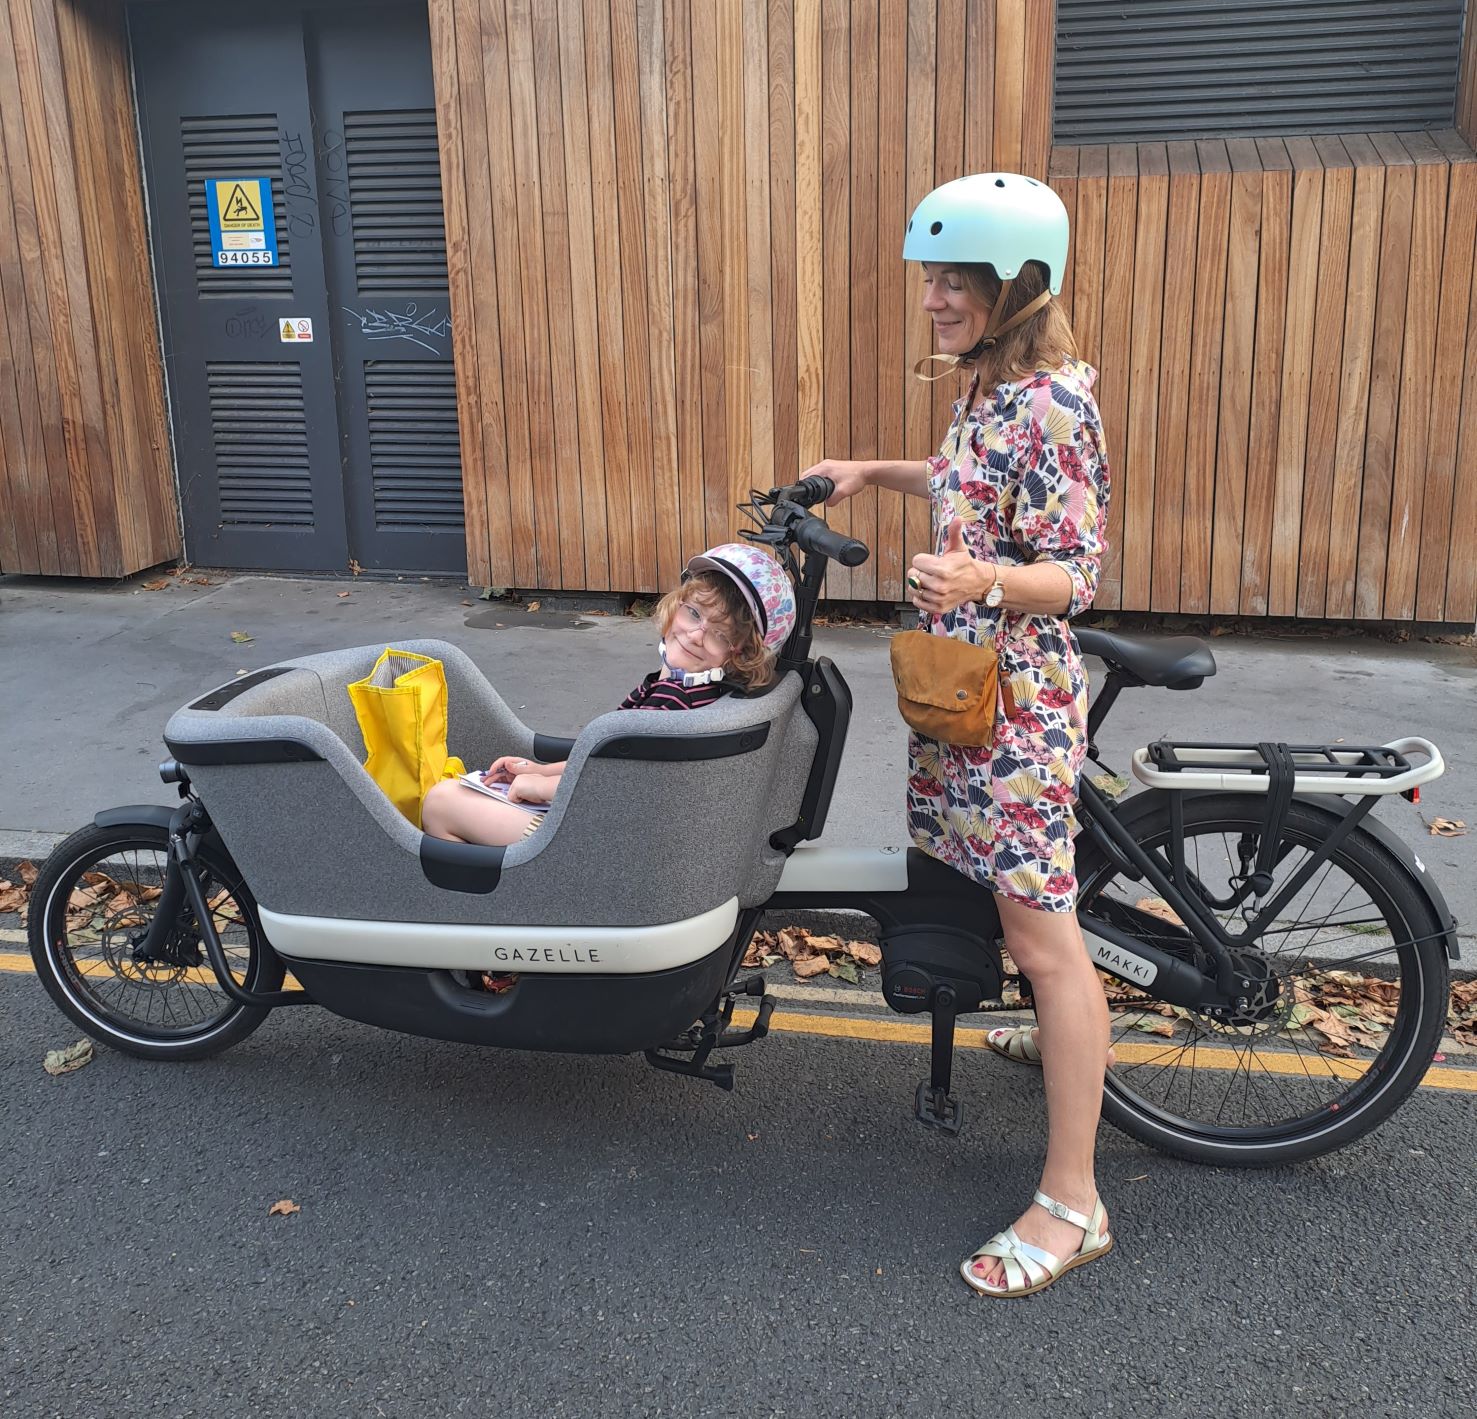 Caz Nicklin ride and reviews an Electric Cargo bike in London with her daughter